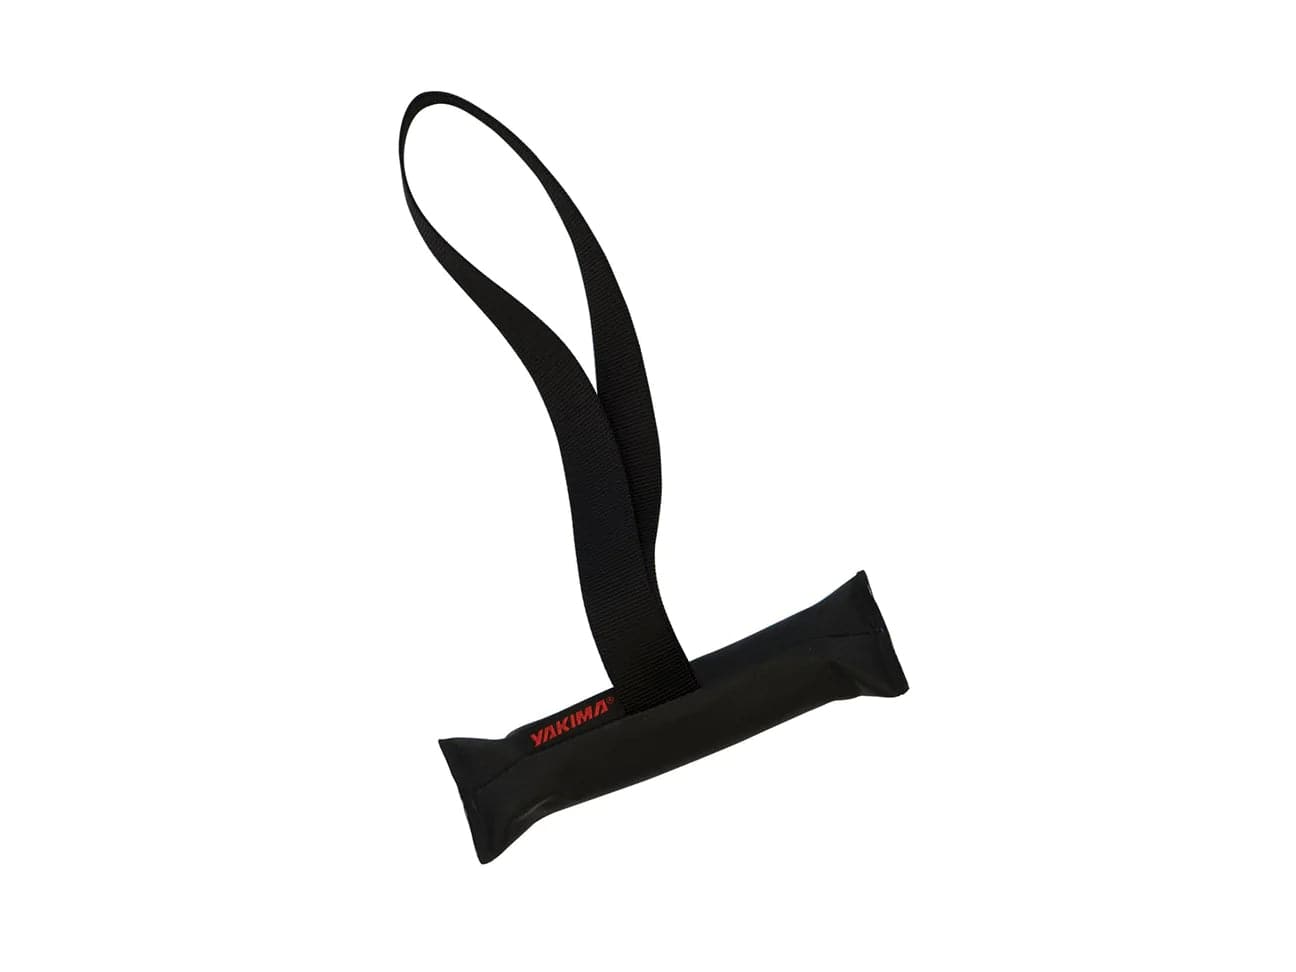 Featuring the Hood Anchor Straps cam strap, rec kayak accessory, snow mount, tour kayak accessory, transport, water mount manufactured by Yakima shown here from one angle.